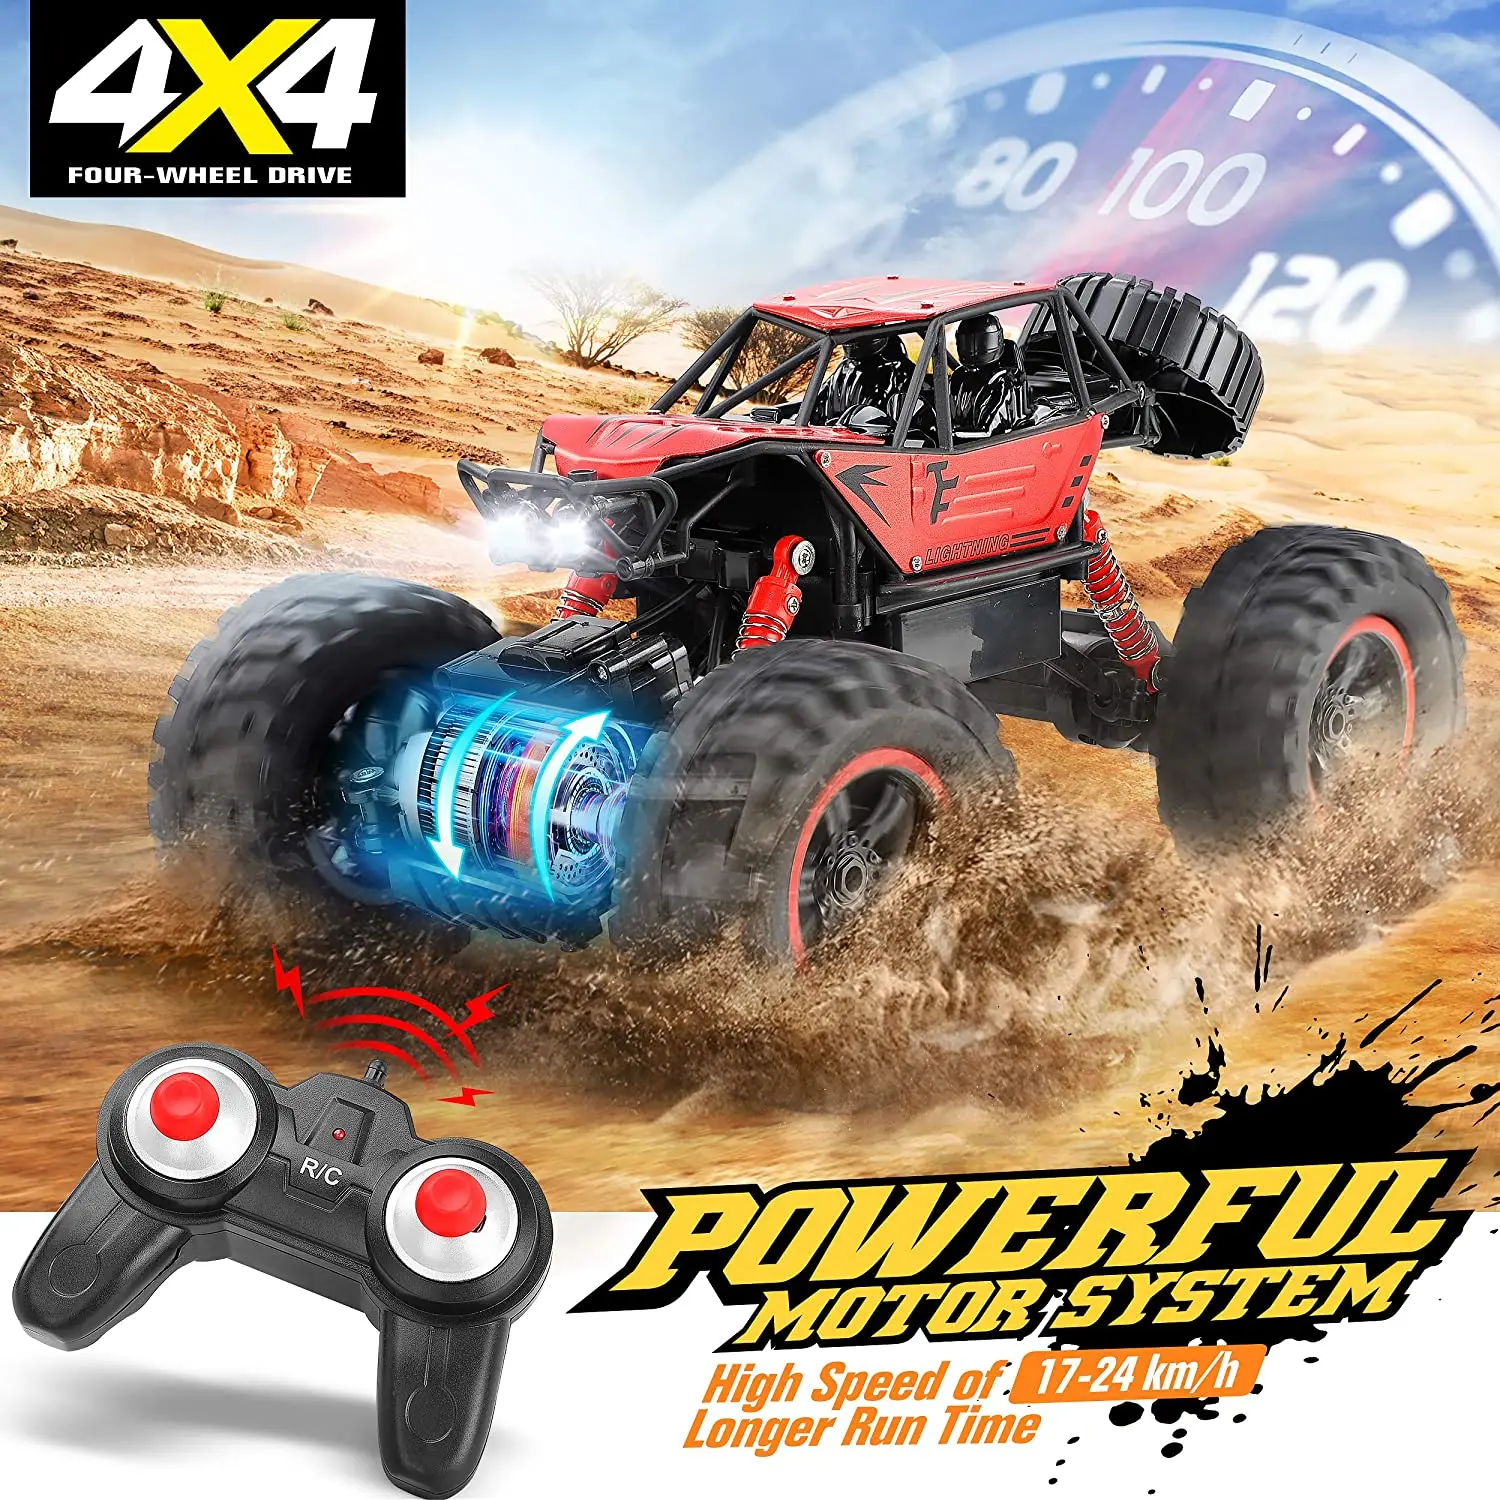 RC Car 1:14 Remote Control Car 4WD RC Vehicle High Speed Watch Remote Control Climbing Off-road Vehicle Toys For Children enlarge